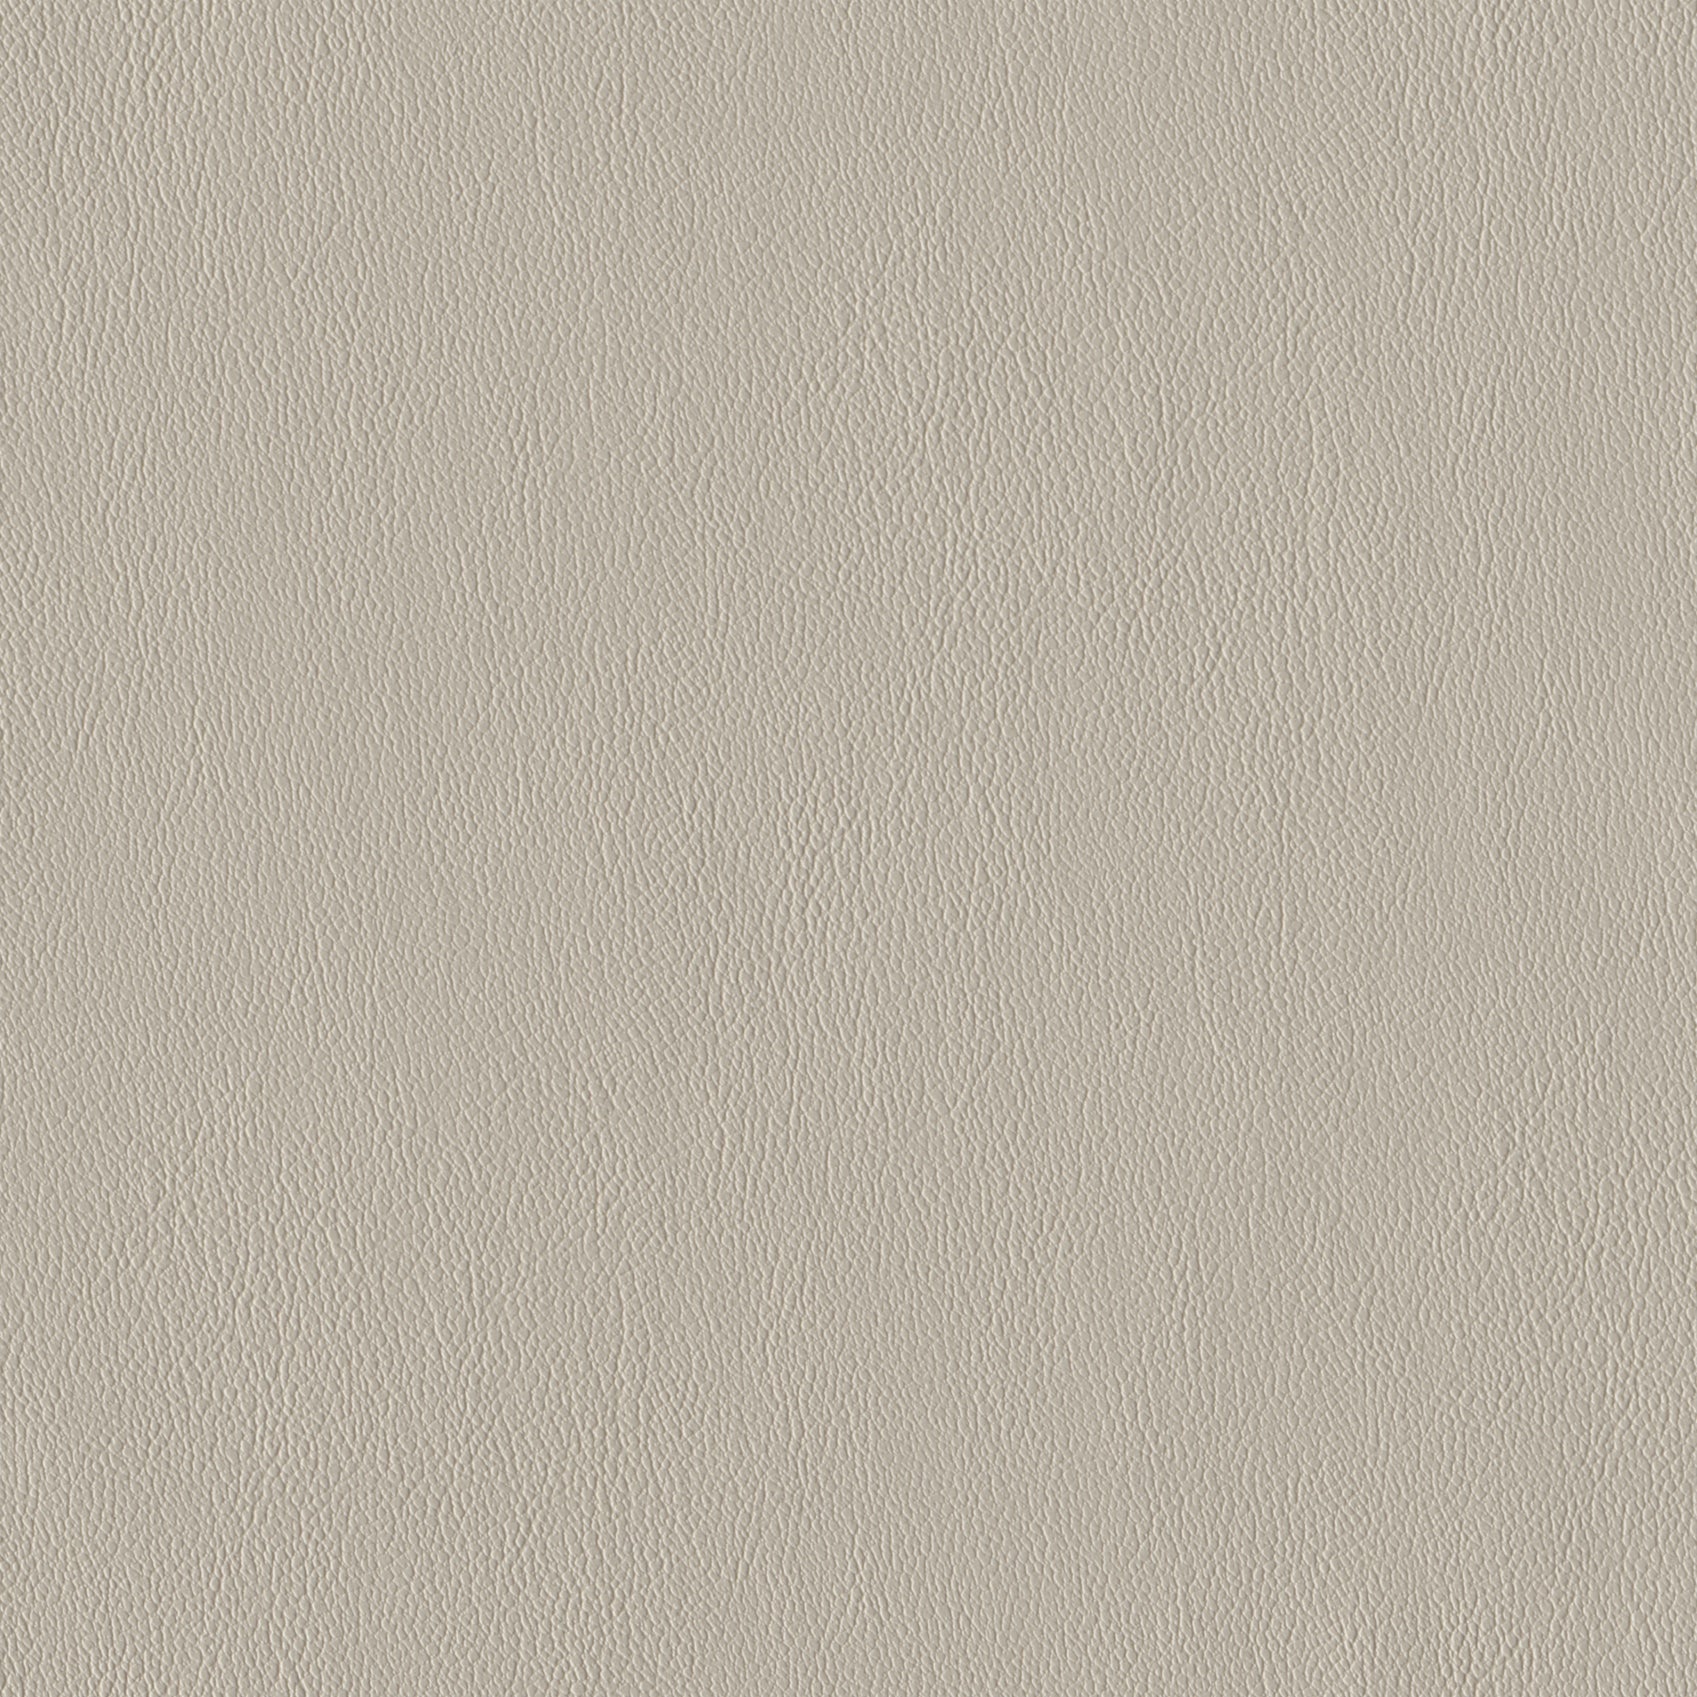 Andriali-Contract-Vinyl_Upholstery-Design-WesternFR5-Color-007Bone-Width-140cm-